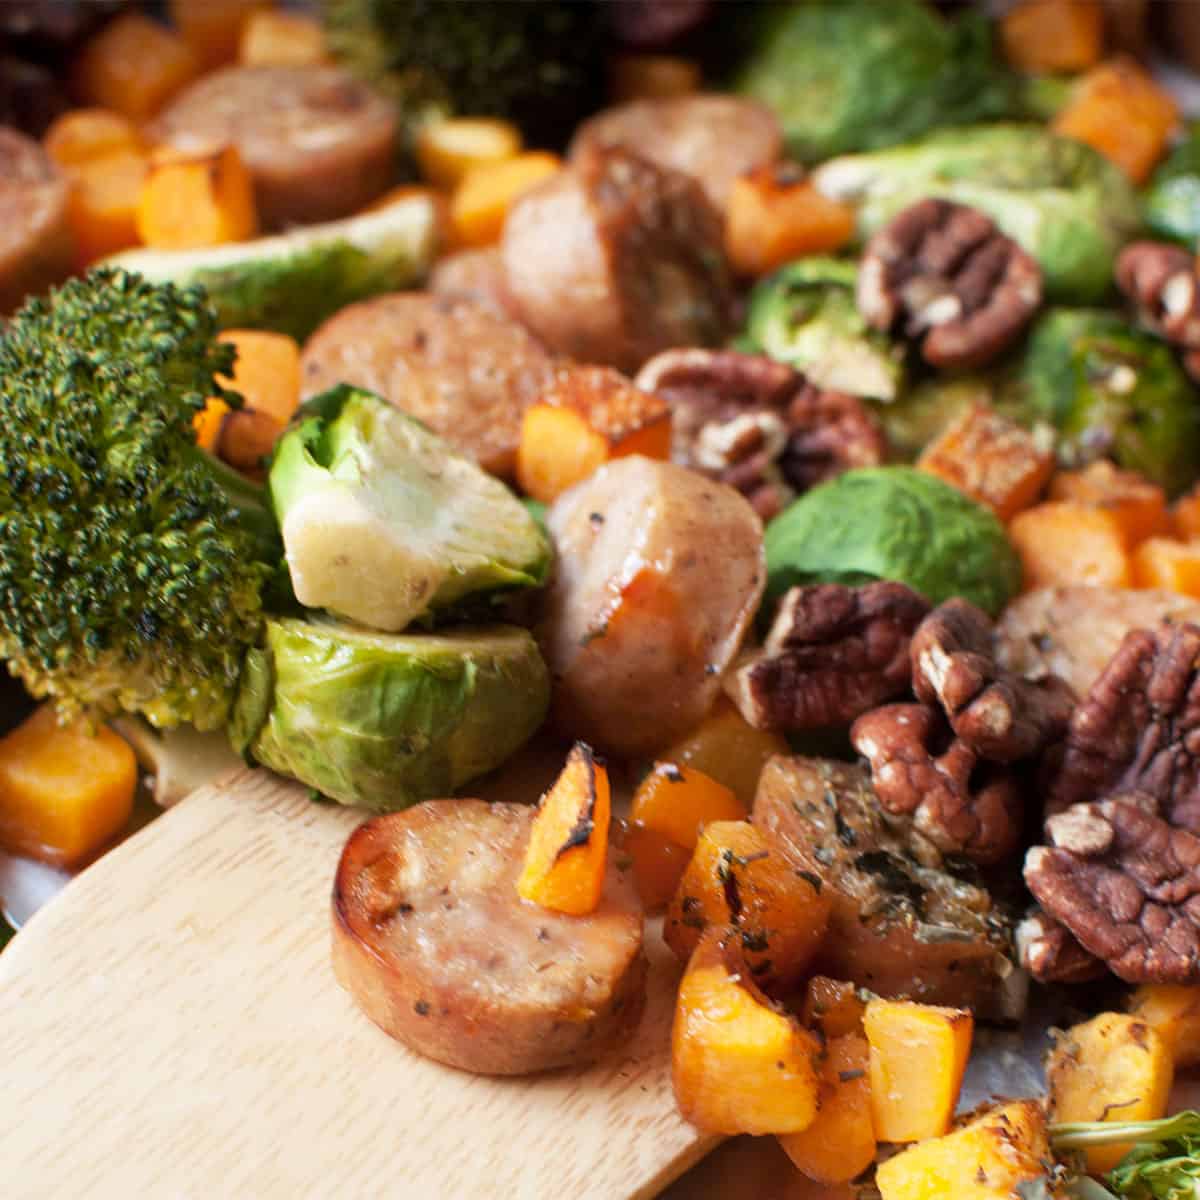 Harvest Sheet Pan Dinner (apple sausage, butternut squash, pecans, broccoli, and brussels sprouts) on a sheet pan. There is a spoon scooping it.